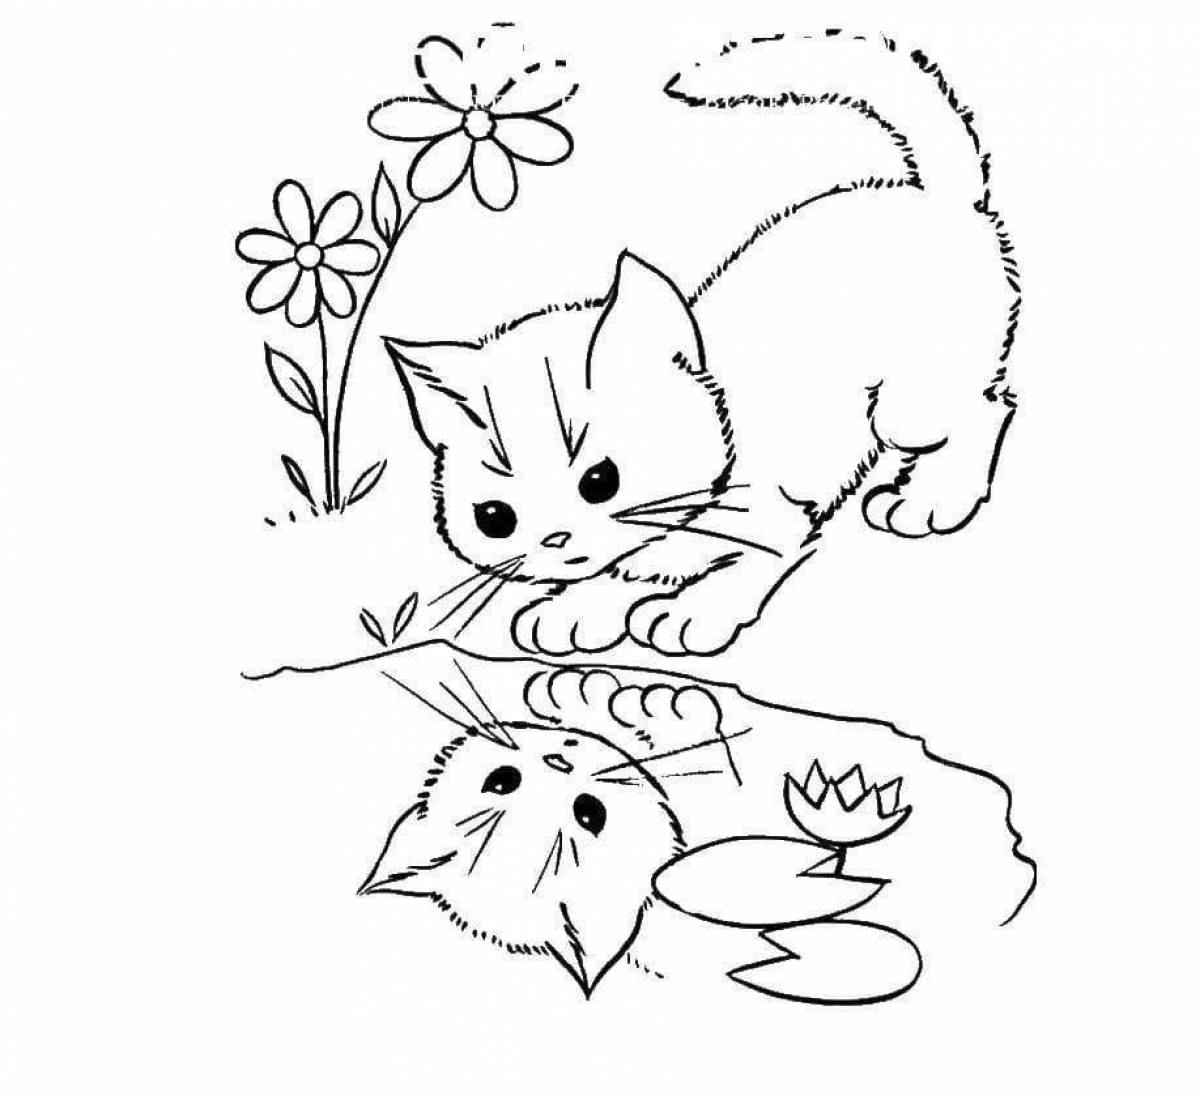 Fun animal coloring pages for 10 year olds